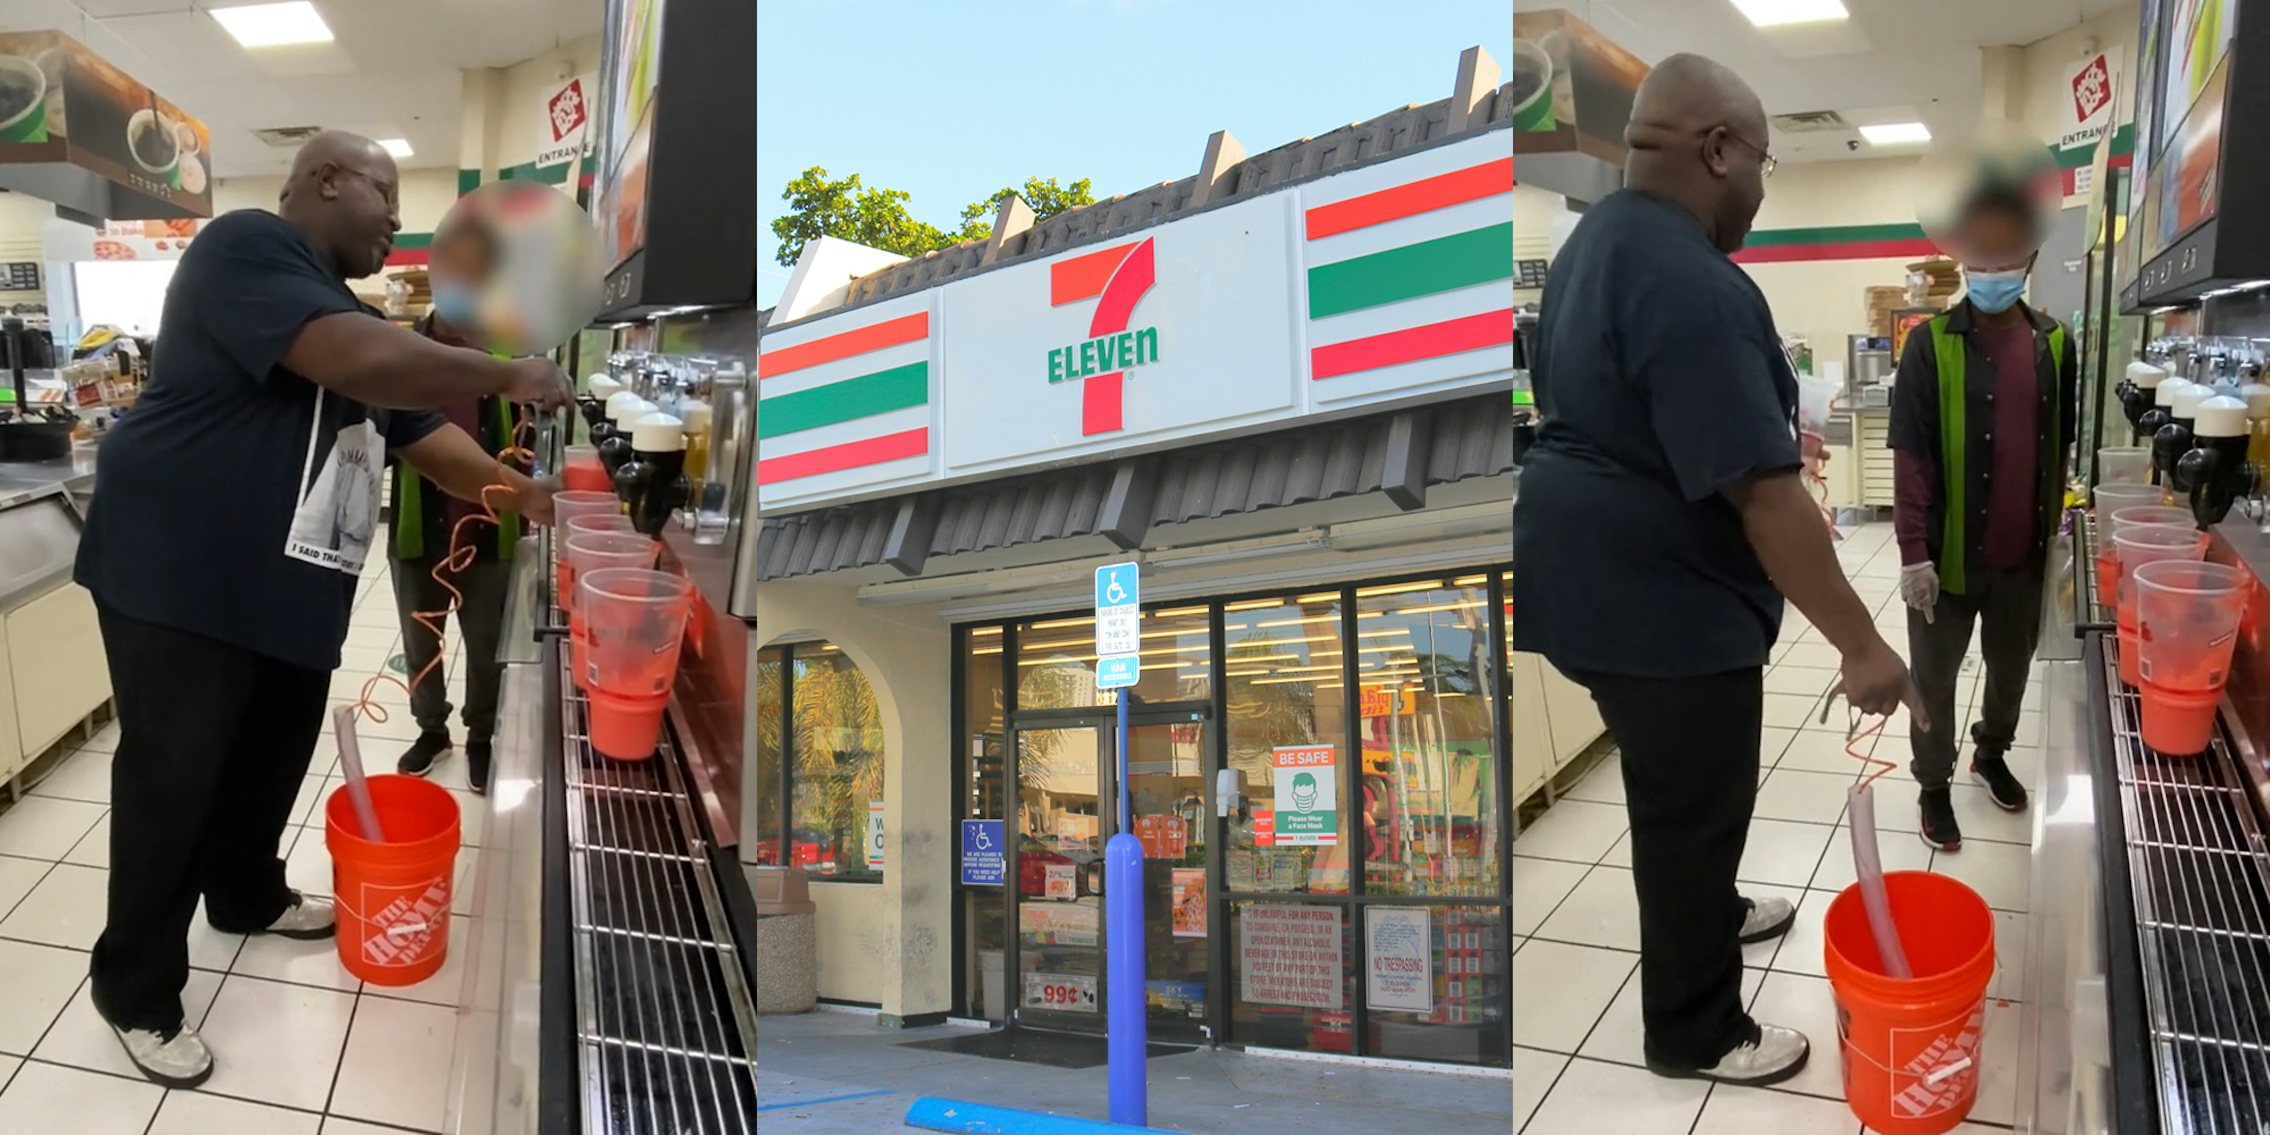 7/11 customer filling bucket from fountain drink machine while speaking to worker (l) 7/11 building with sign (c) 7/11 customer filling bucket from fountain drink machine while speaking to worker (r)